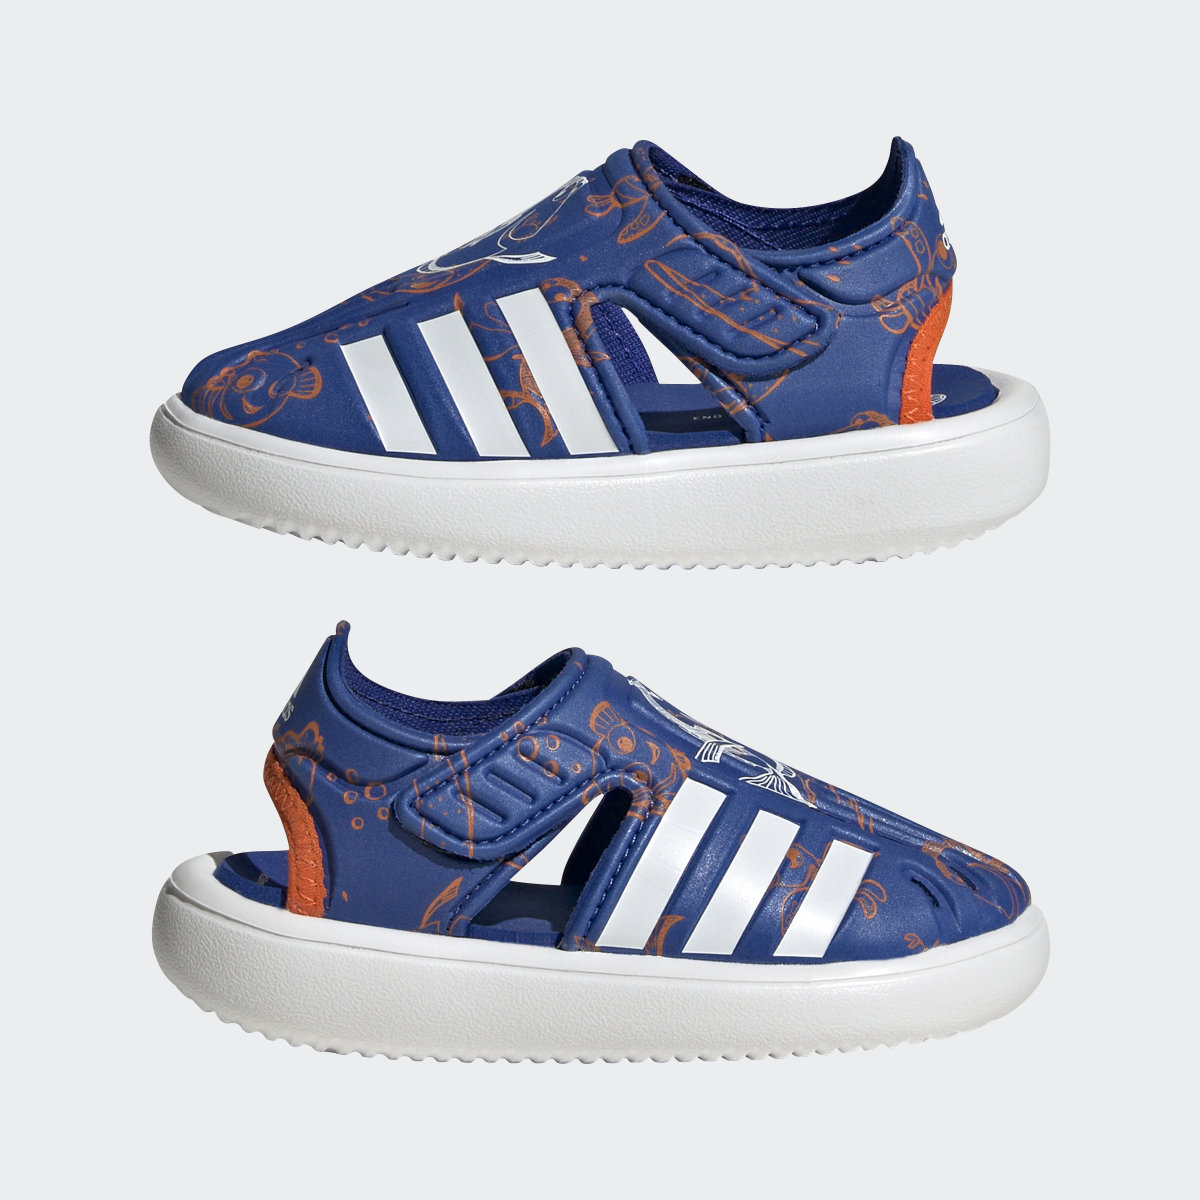 Adidas Sandali Finding Nemo and Dory Closed Toe Summer Water. 8